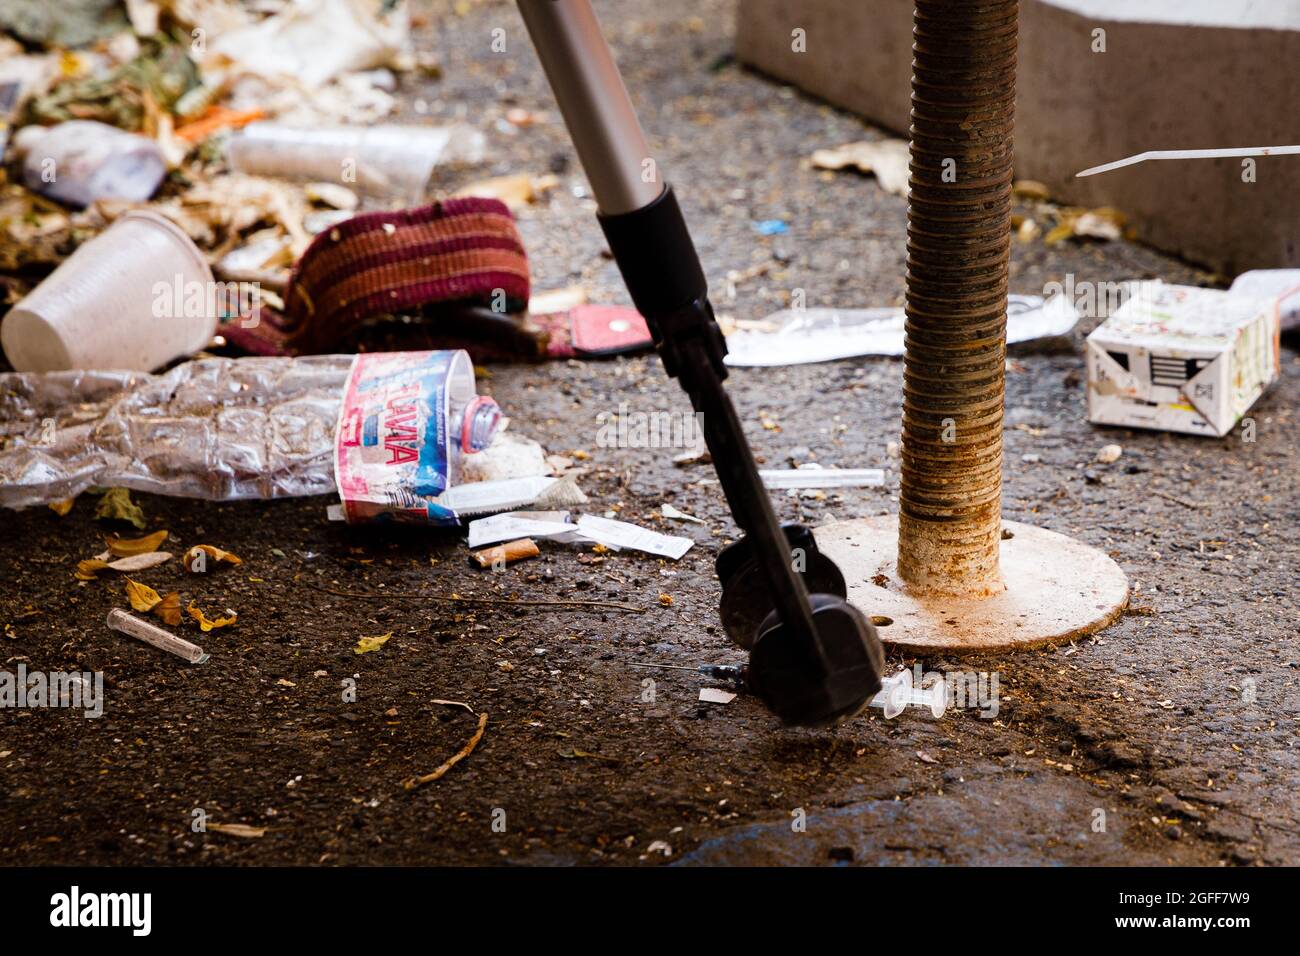 Heroin syringe gathering from the ground, Italy Stock Photo